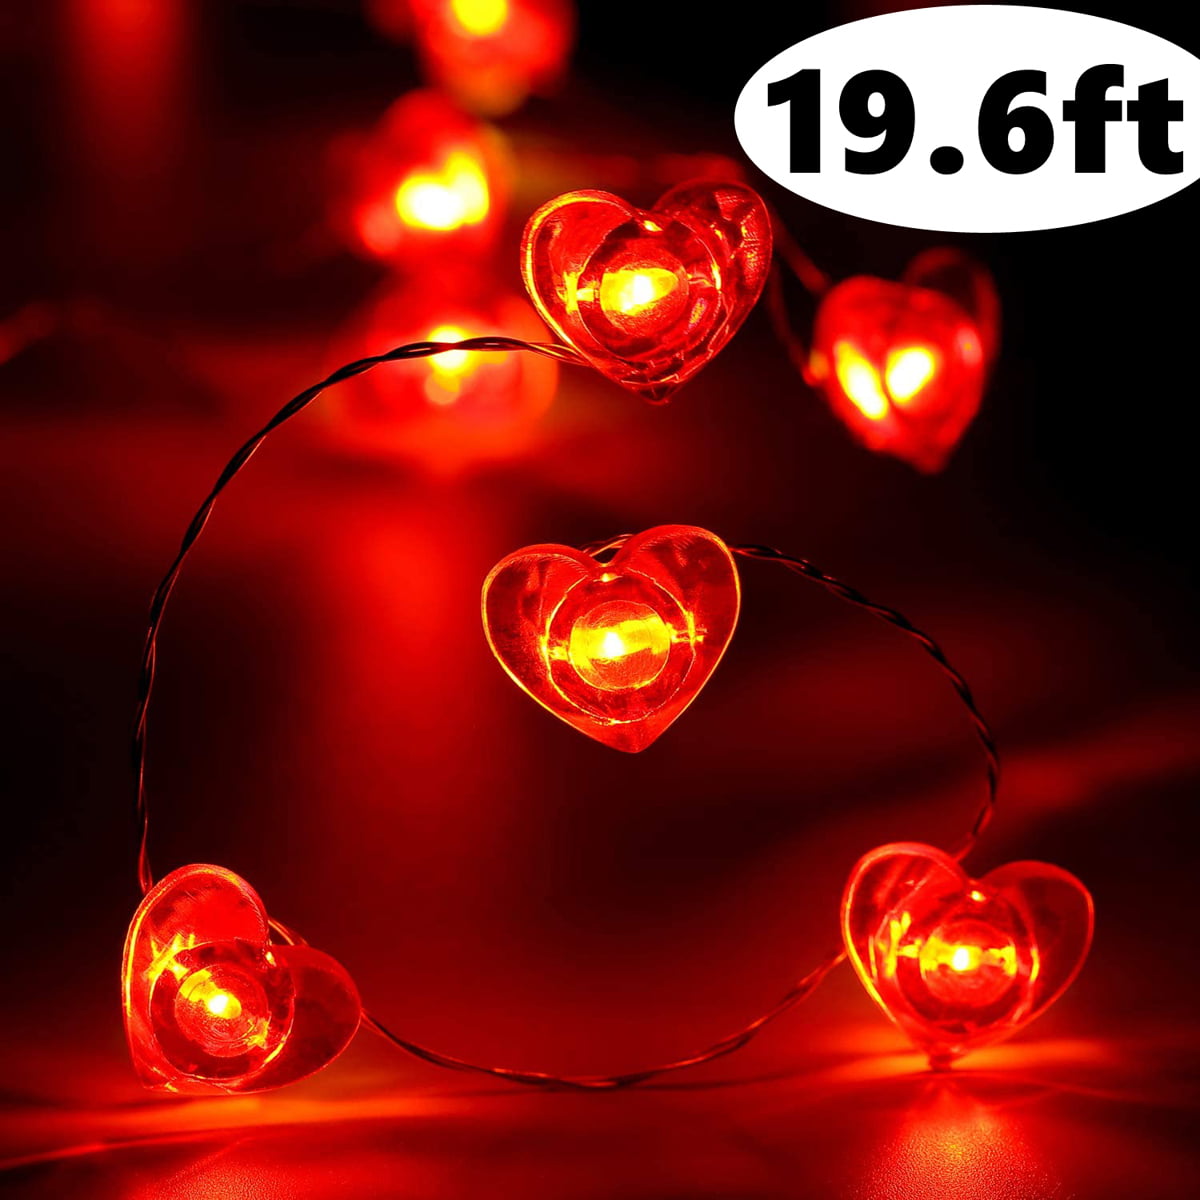 Red Hearts 10 LED Fairy String Lights Battery Power Operated 2-AA DIY Crafting 